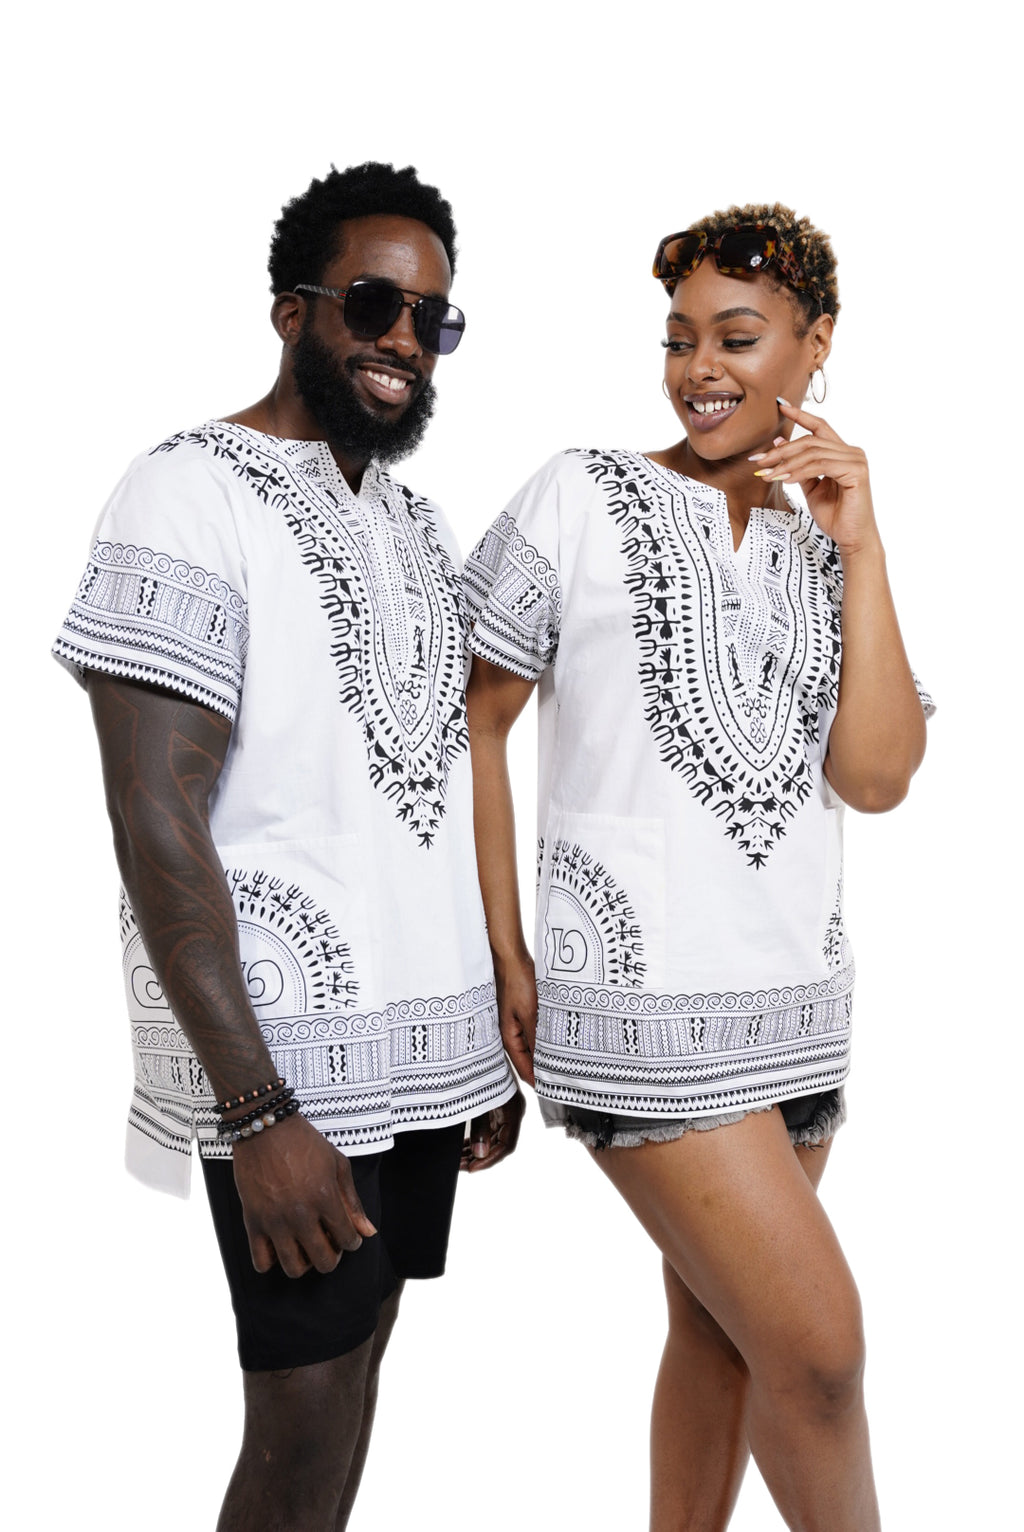 Dupsie's White African Print Unisex Dashiki Shirt Suitable for Festivals, Concerts, Cruises, Outdoor Events -DP3830M